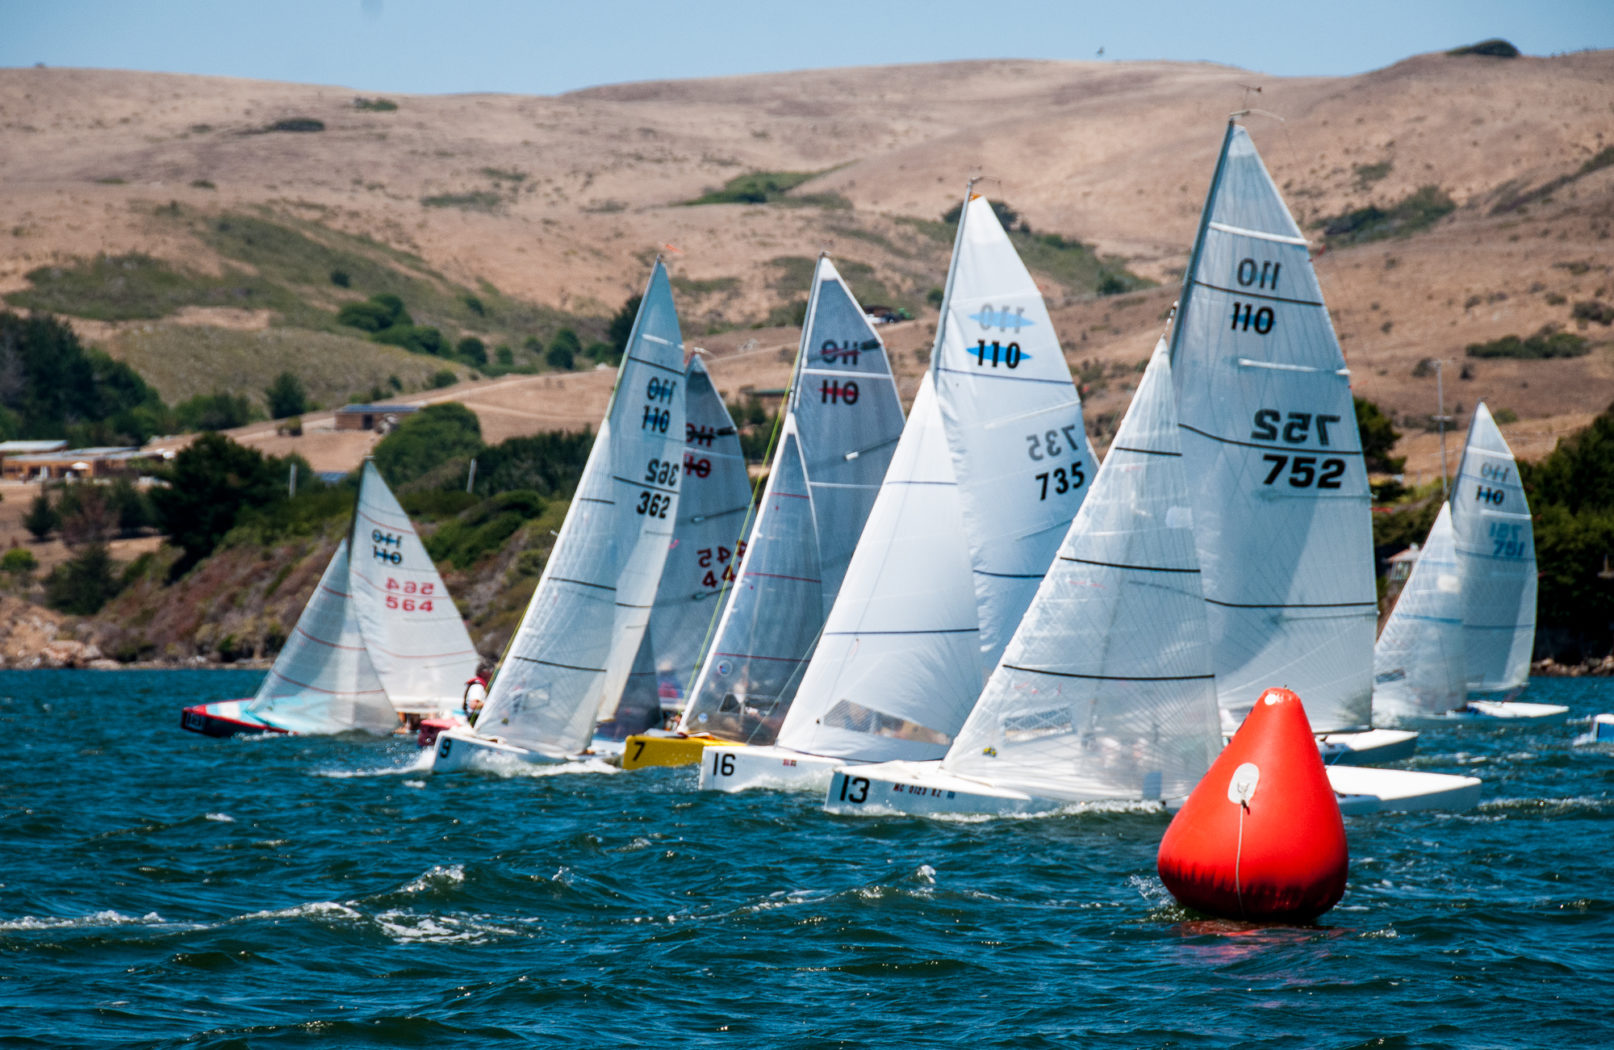 2016 national regatta – results, nor, entry form and